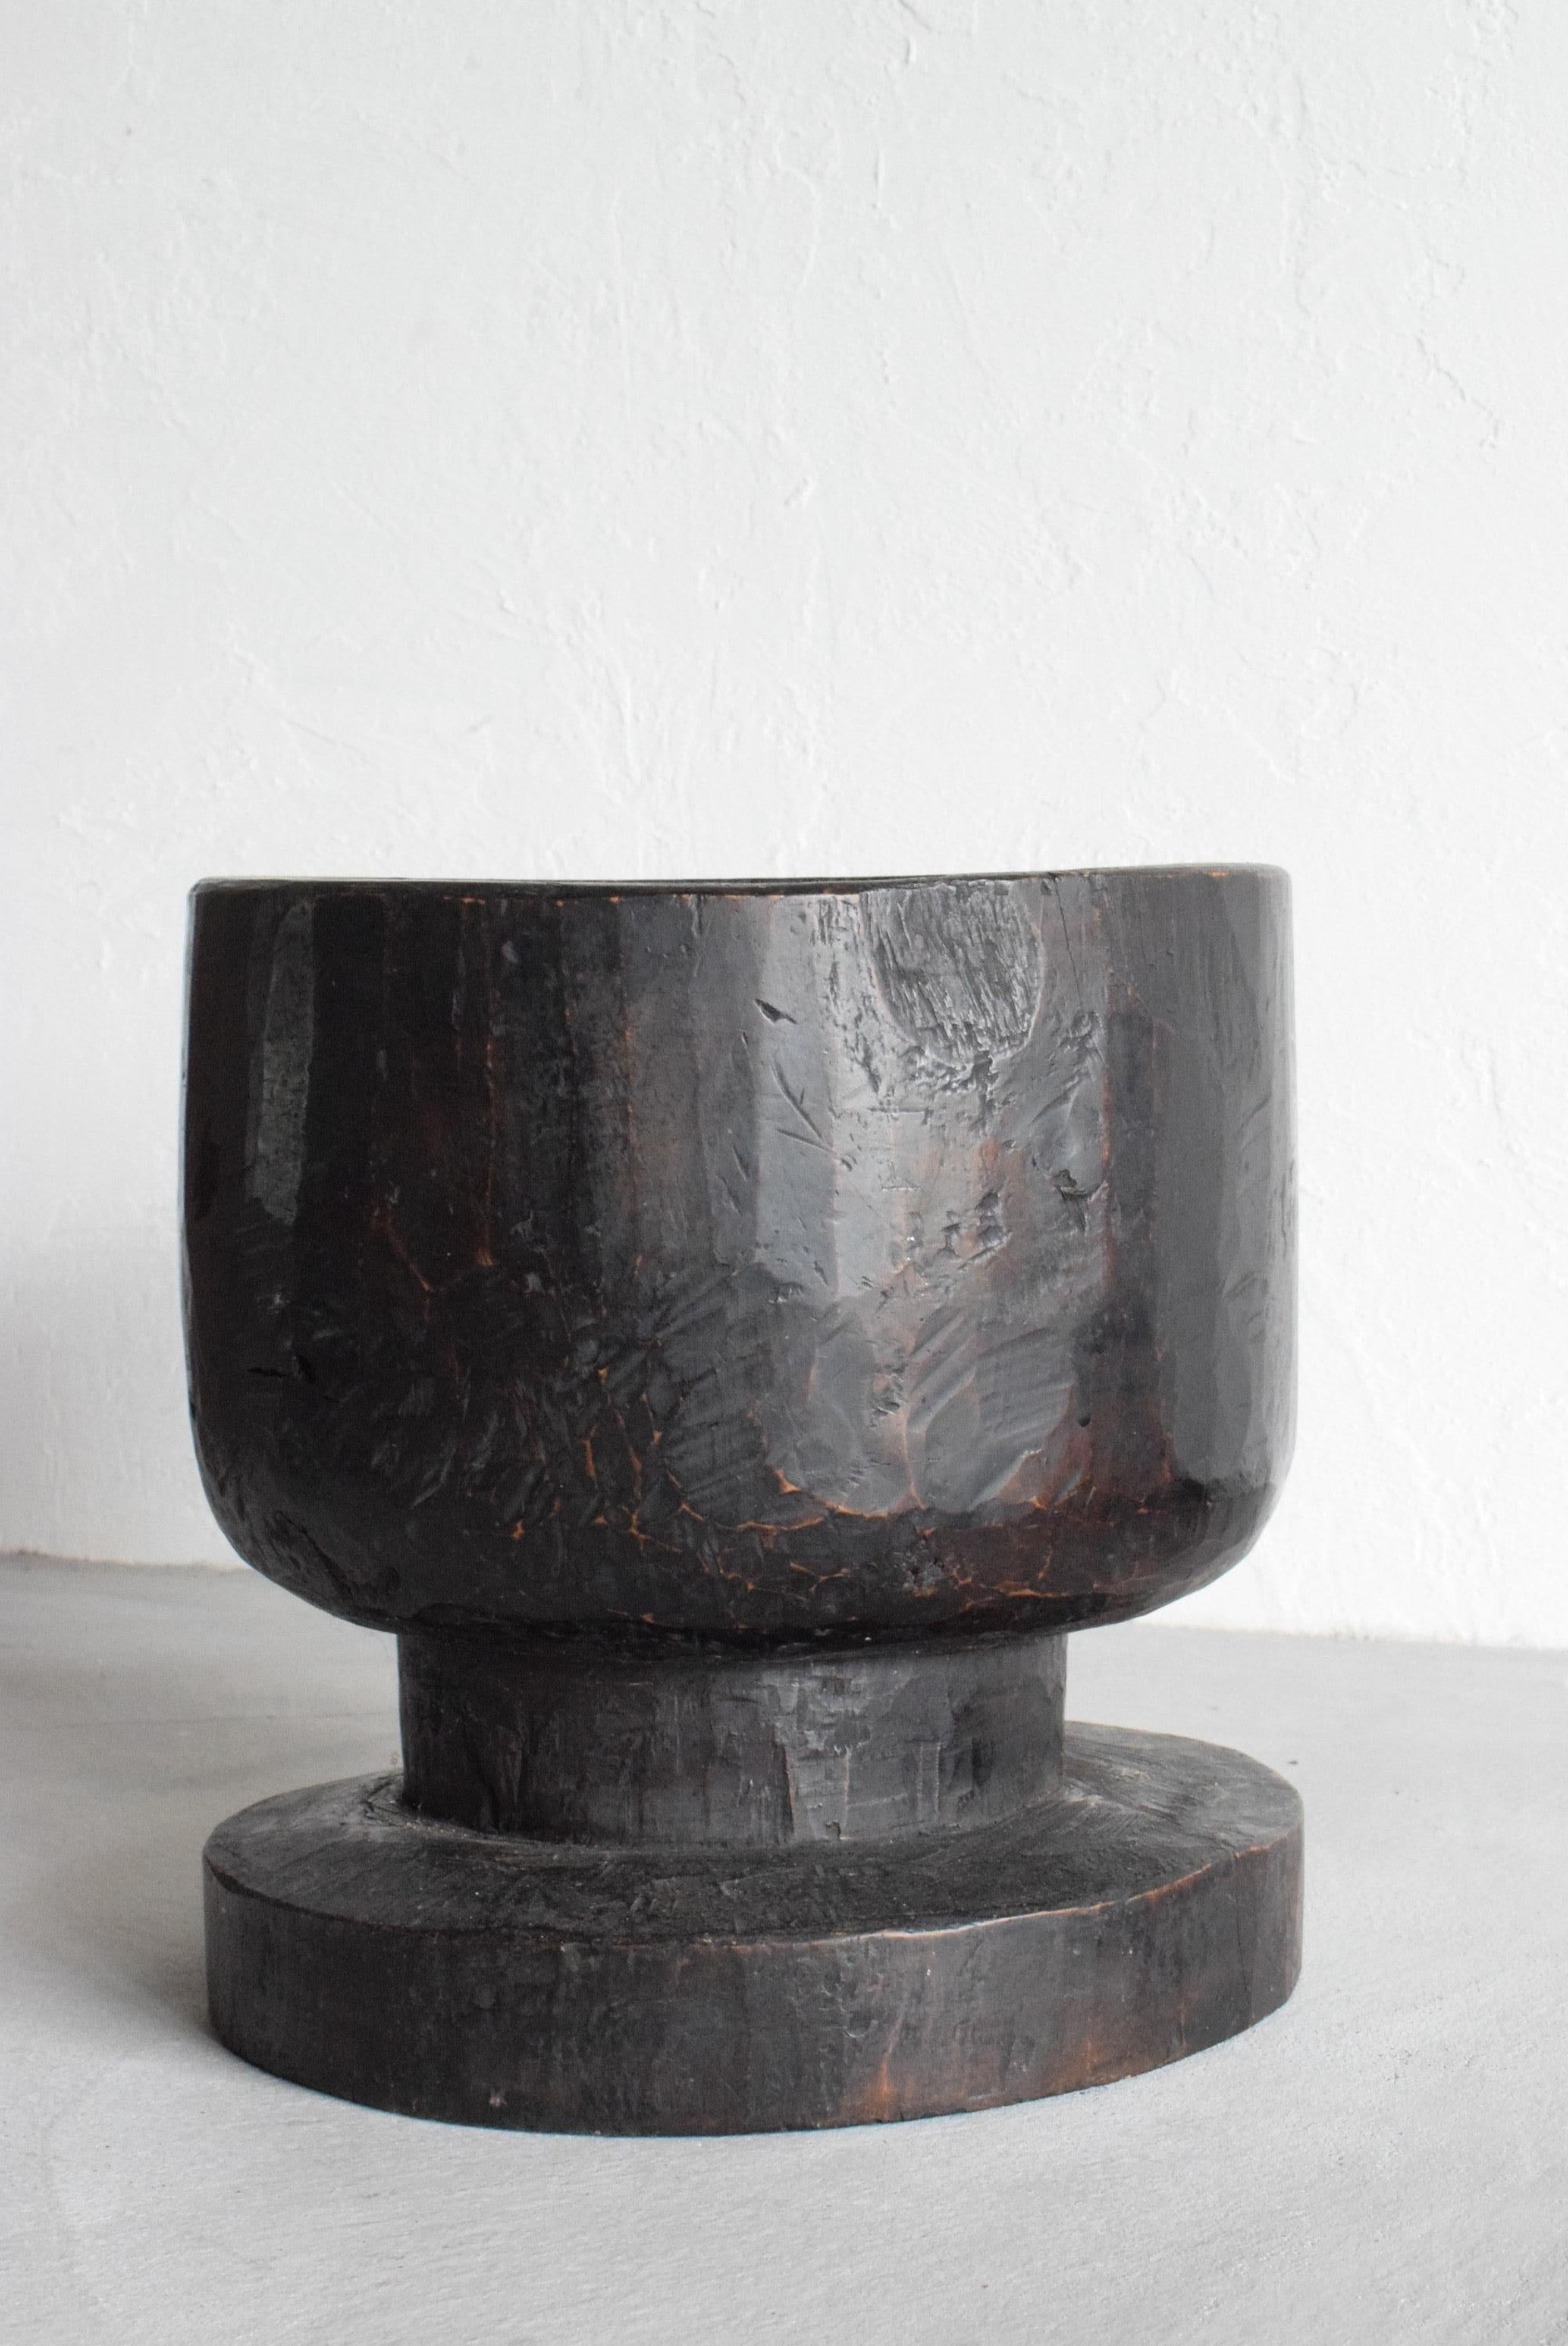 This is a very old Japanese large wooden mortar. It is from the Meiji period (1860s-1900s). The material is zelkova. It is a powerful object carved from a large zelkova tree. It has an overwhelming presence.

Weight 5 kg.